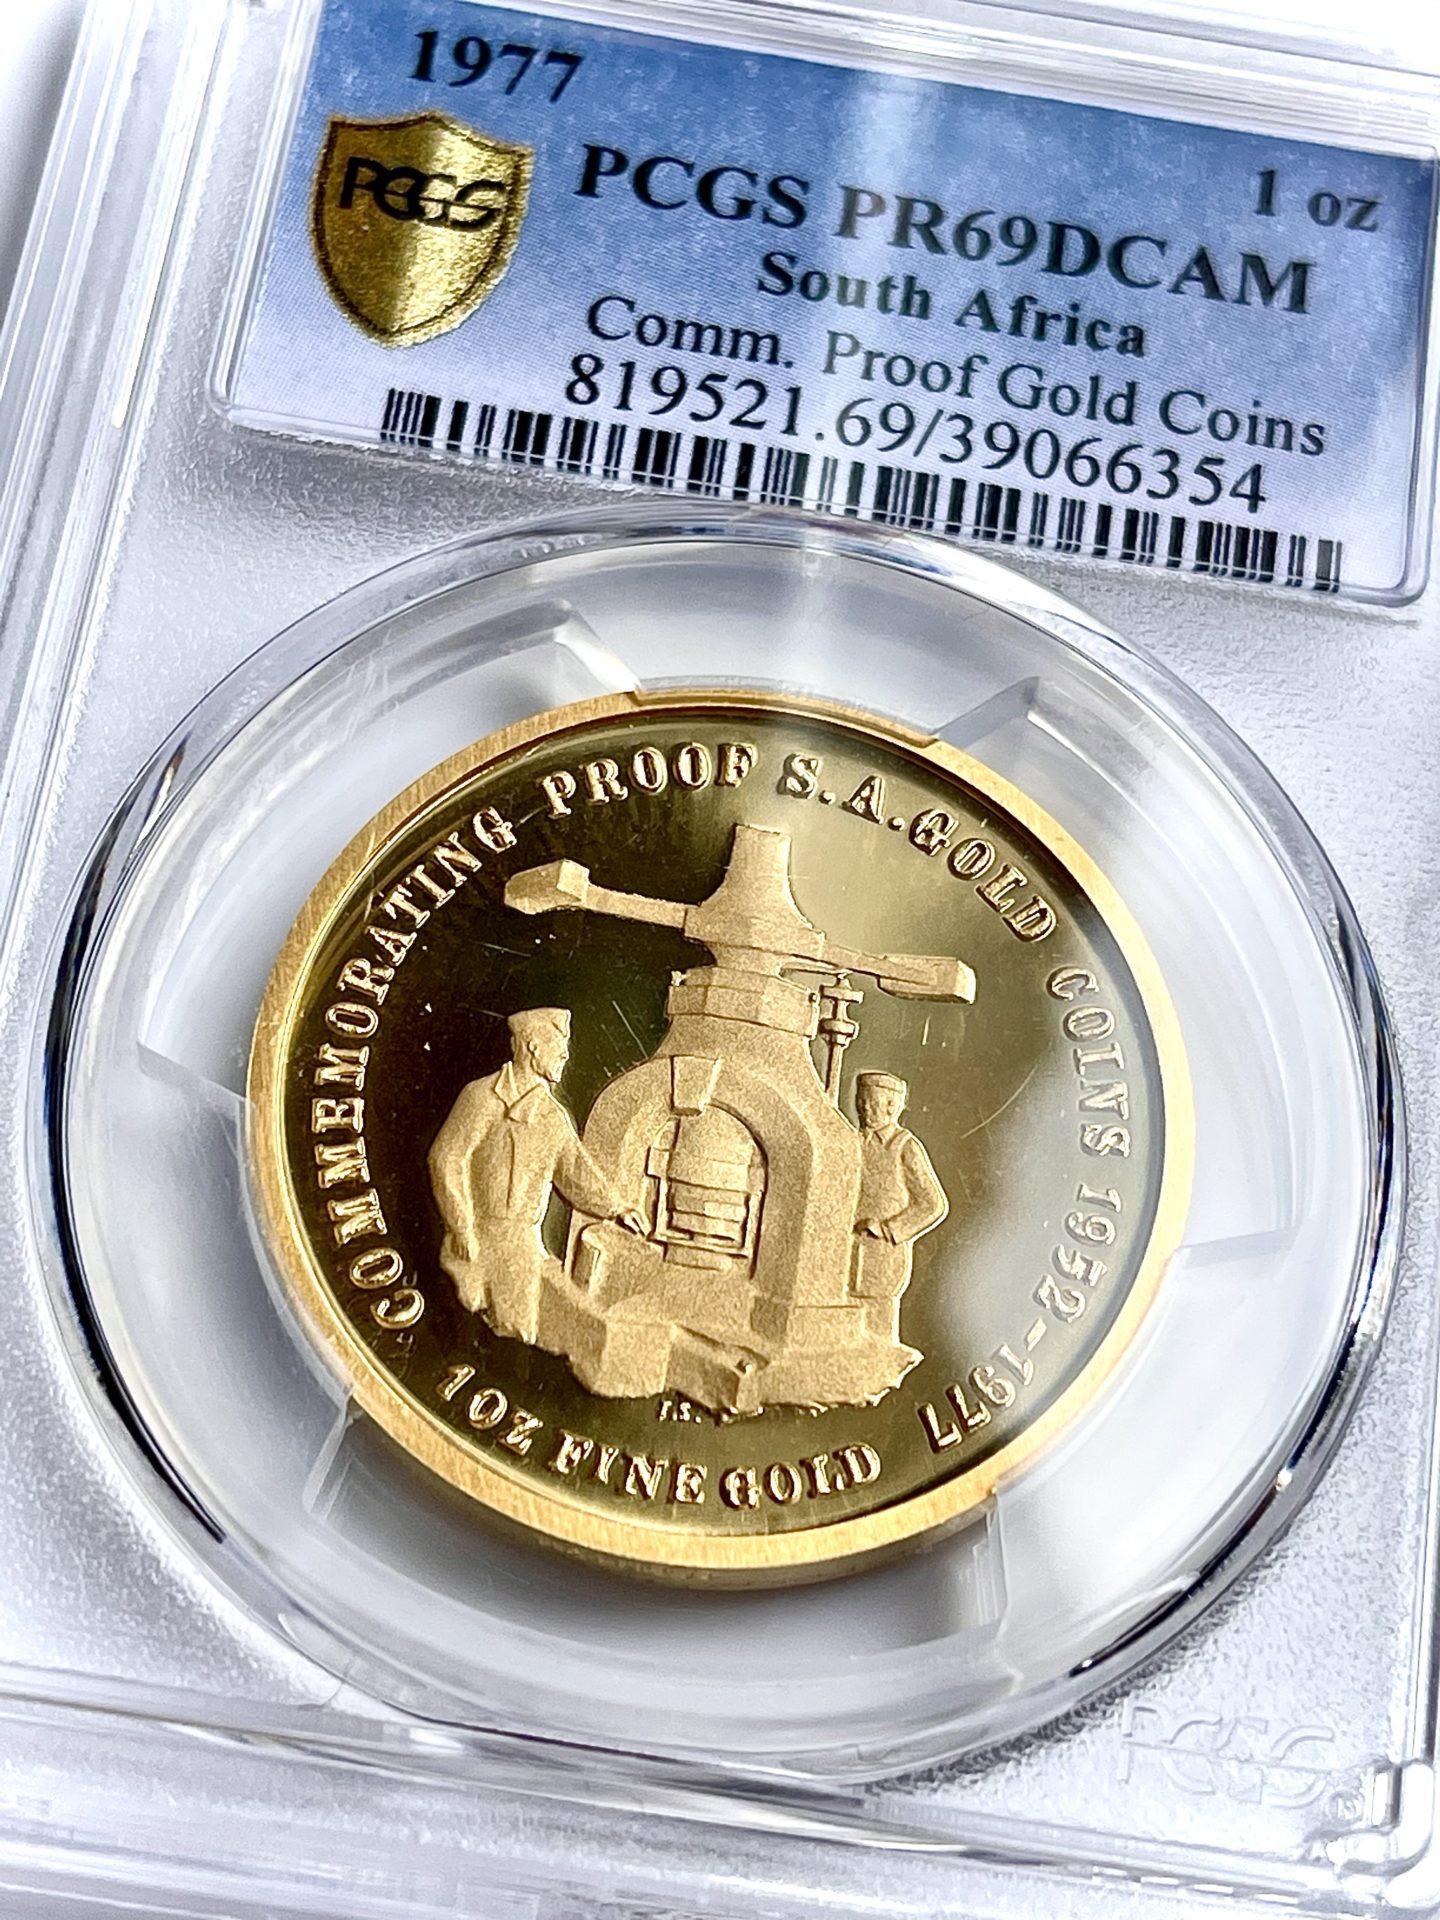 South Africa 1977 25 years commemorative proof gold coins PCGS PR 69 DCAM